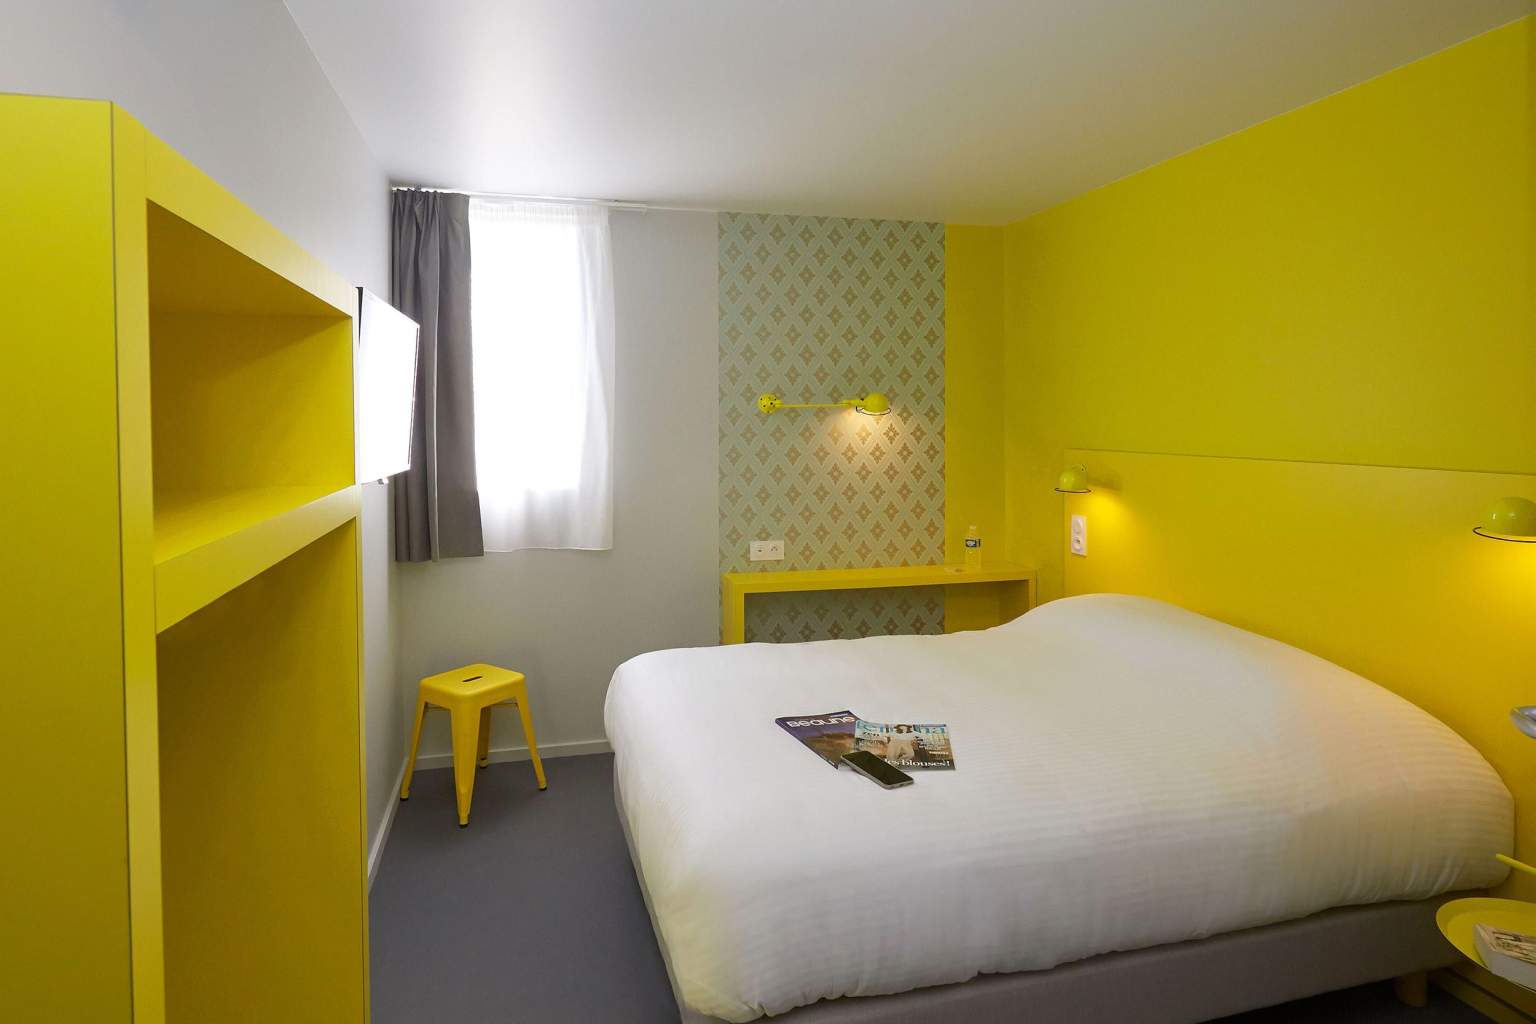 Room at COTO HOTEL Beaune, Low-cost Hotel in Burgundy